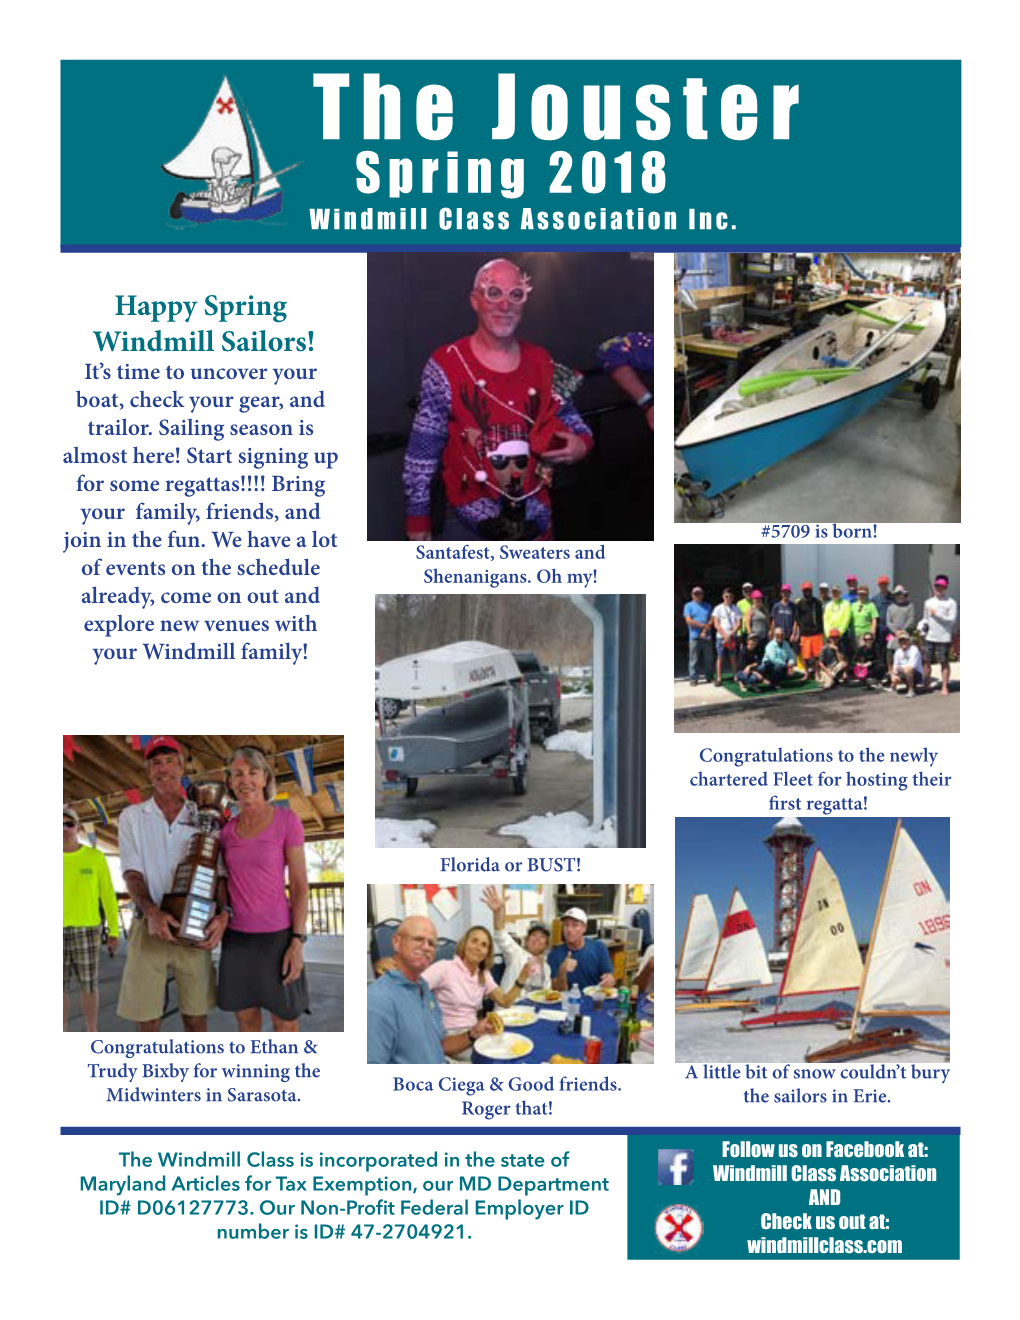 The Jouster Spring 2018 Windmill Class Association Inc